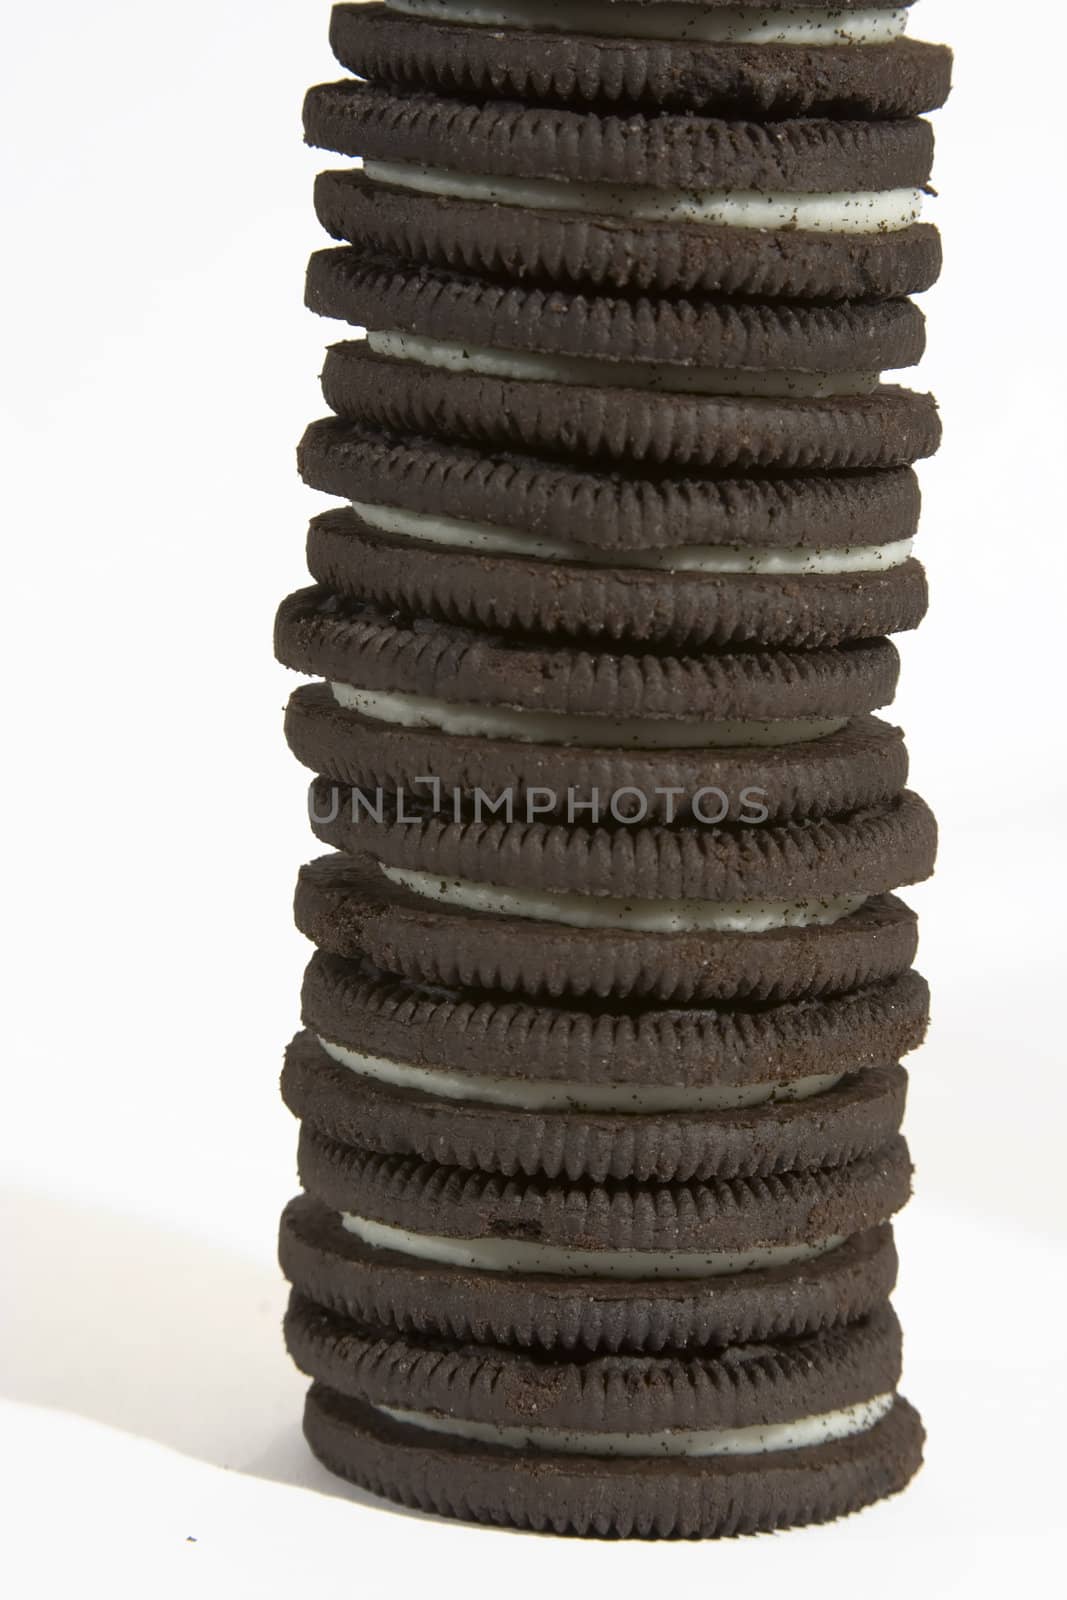 stack of sandwich cookie on white background with slight shadow